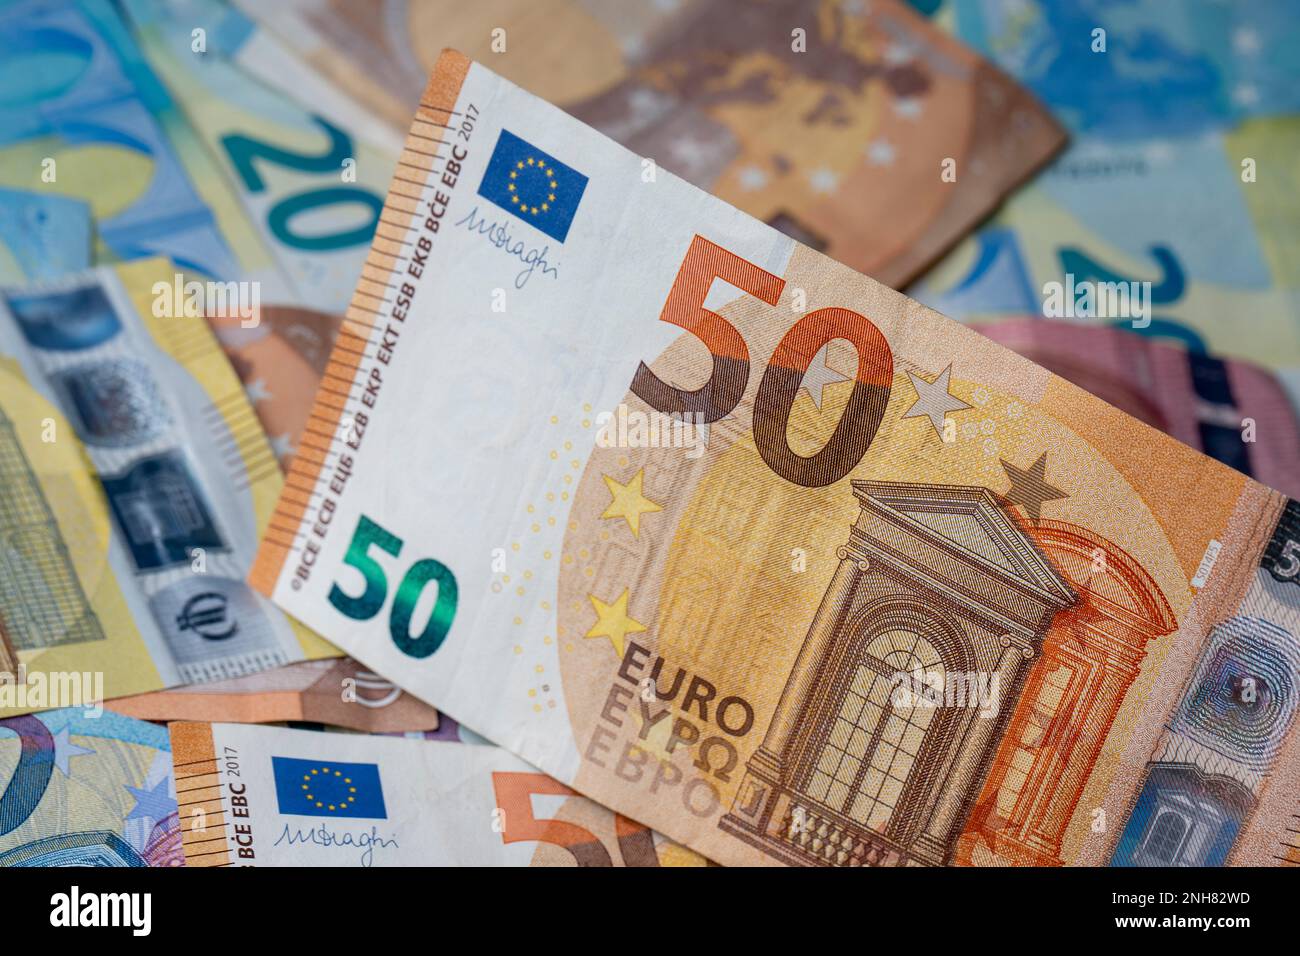 A pile of banknotes on the table. Fifty euro paper money denomination in focus. Mixed euro banknotes in the background. Stock Photo